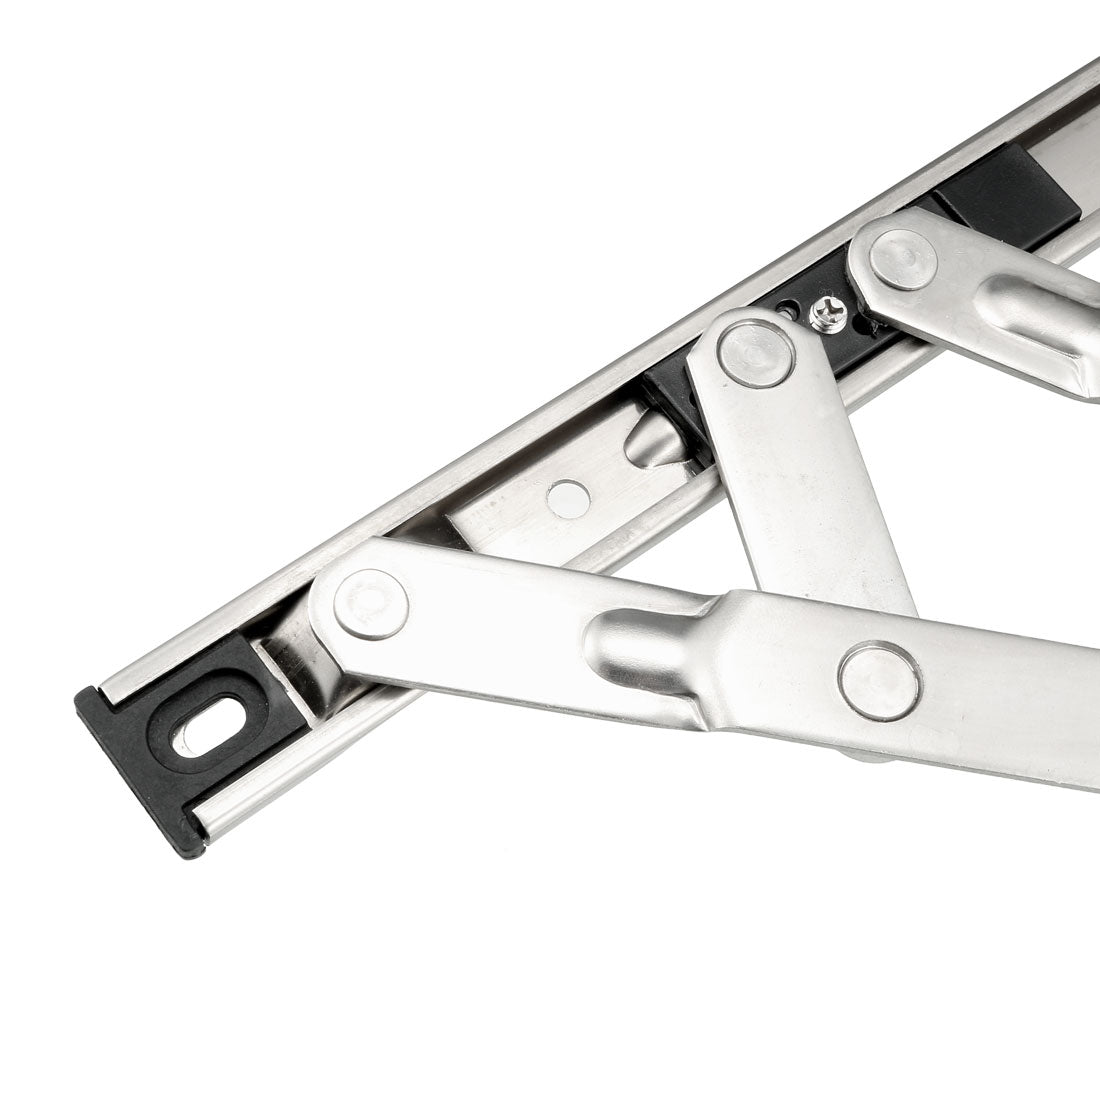 uxcell Uxcell 8-Inch Hanging/Casement Window Hinge, 202 Stainless Steel 2Pcs